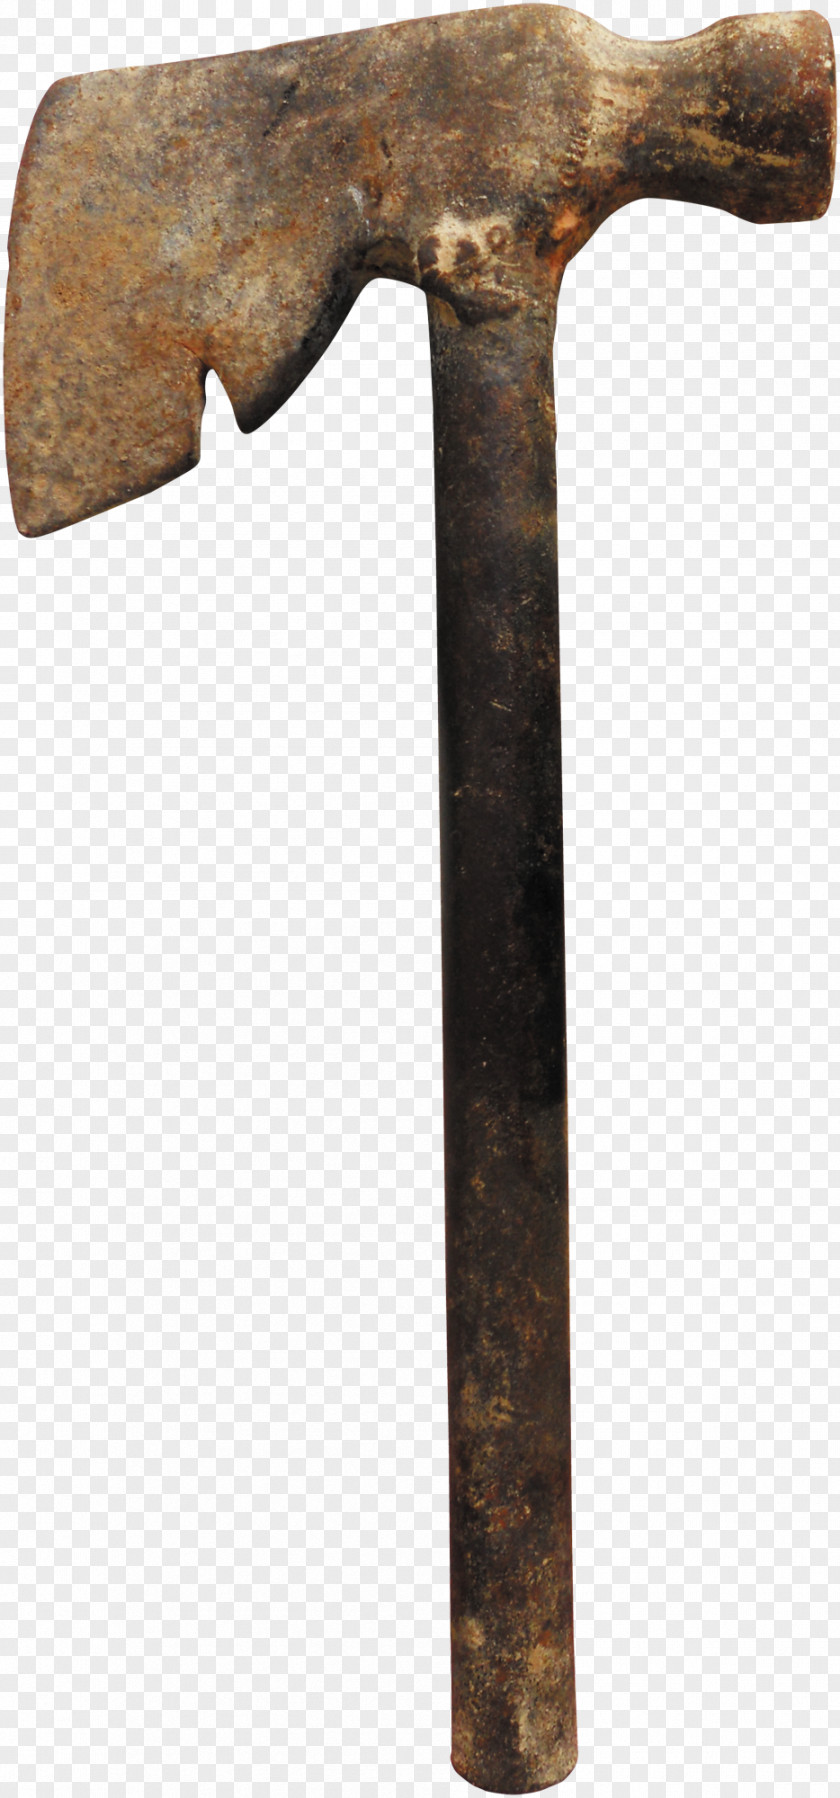 Iron Ax Material Free To Pull Steel Splitting Maul PNG